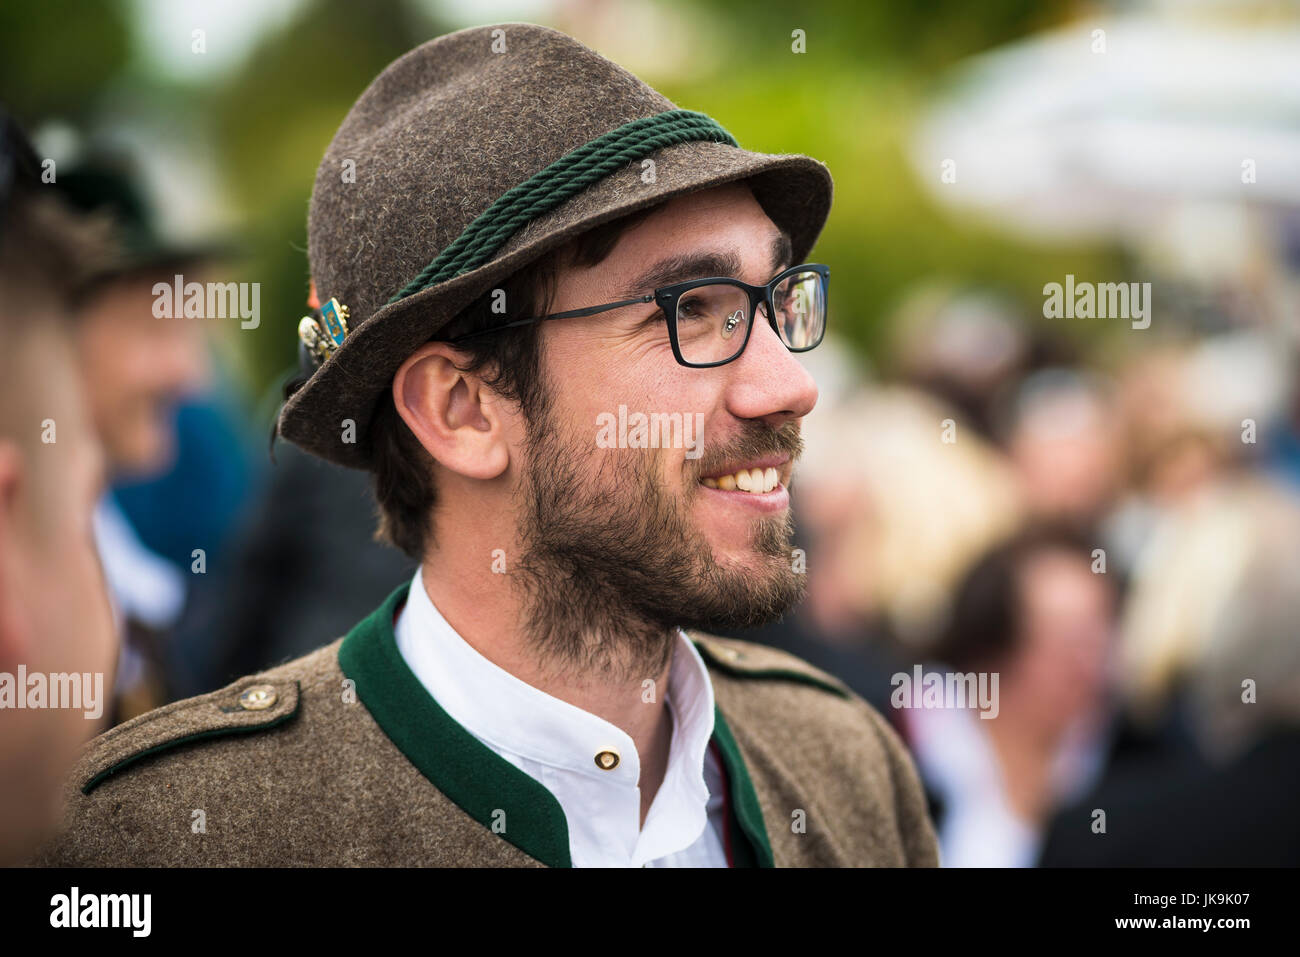 German man in traditional costume with Bavarian felt hat with tuft of hair from a chamois and buttons Stock Photo